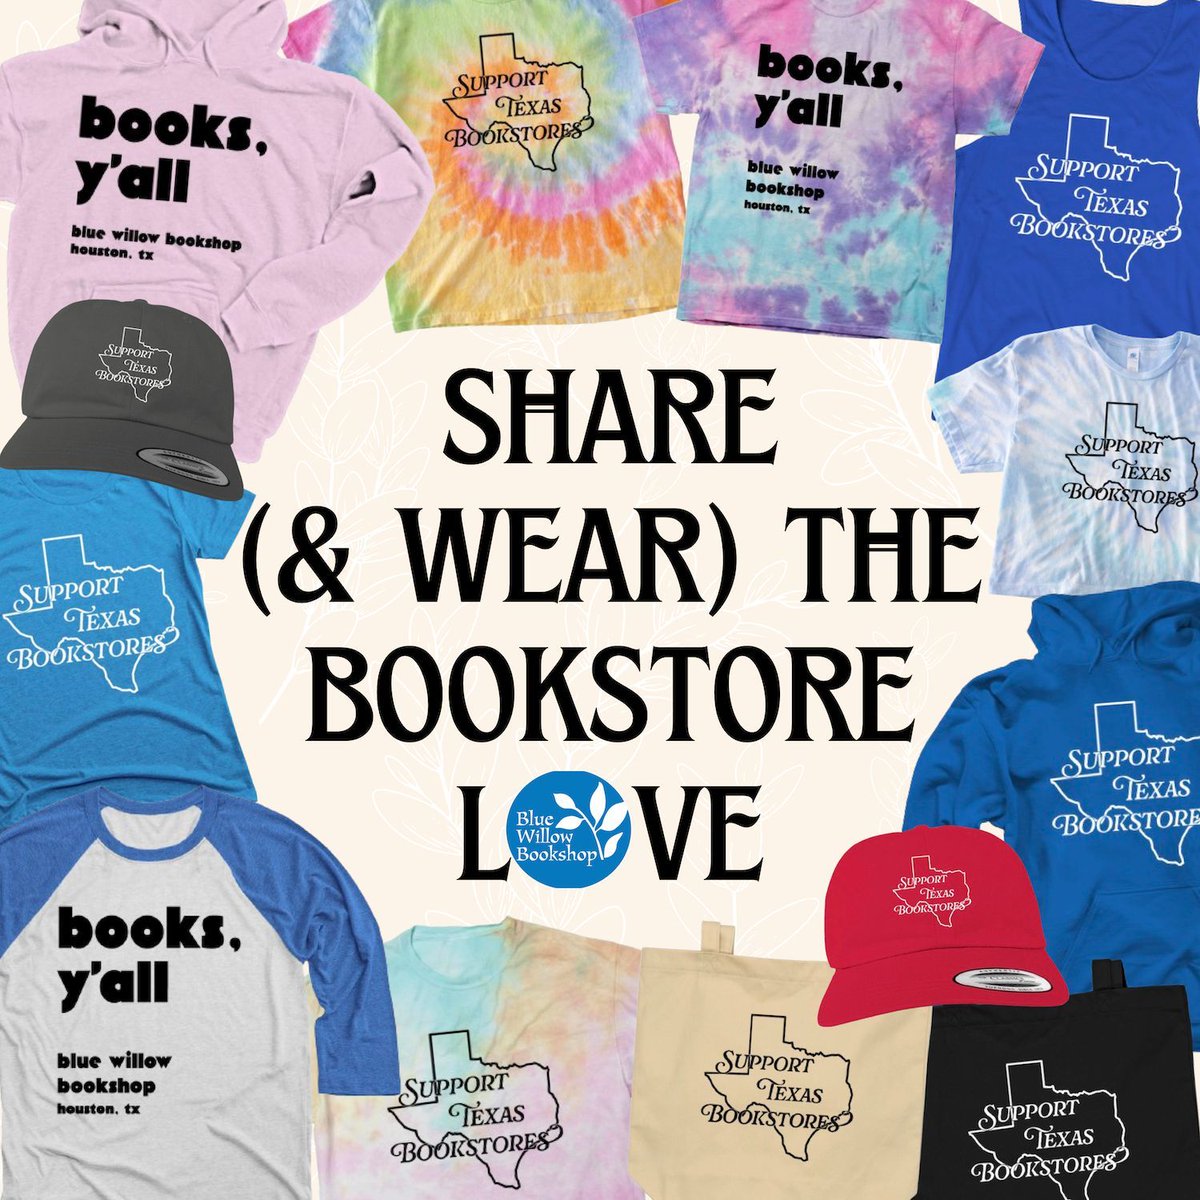 Celebrate #IndieBookstoreDay with our 'Support Texas Bookstores' and 'Books, Y'all' merch! 😍 For a limited time, visit our @bonfire storefront to check it out: we have hoodies, tees, tie-dye, hats, totes, and more! bonfire.com/store/bluewill… Happy reading, y'all. 💙